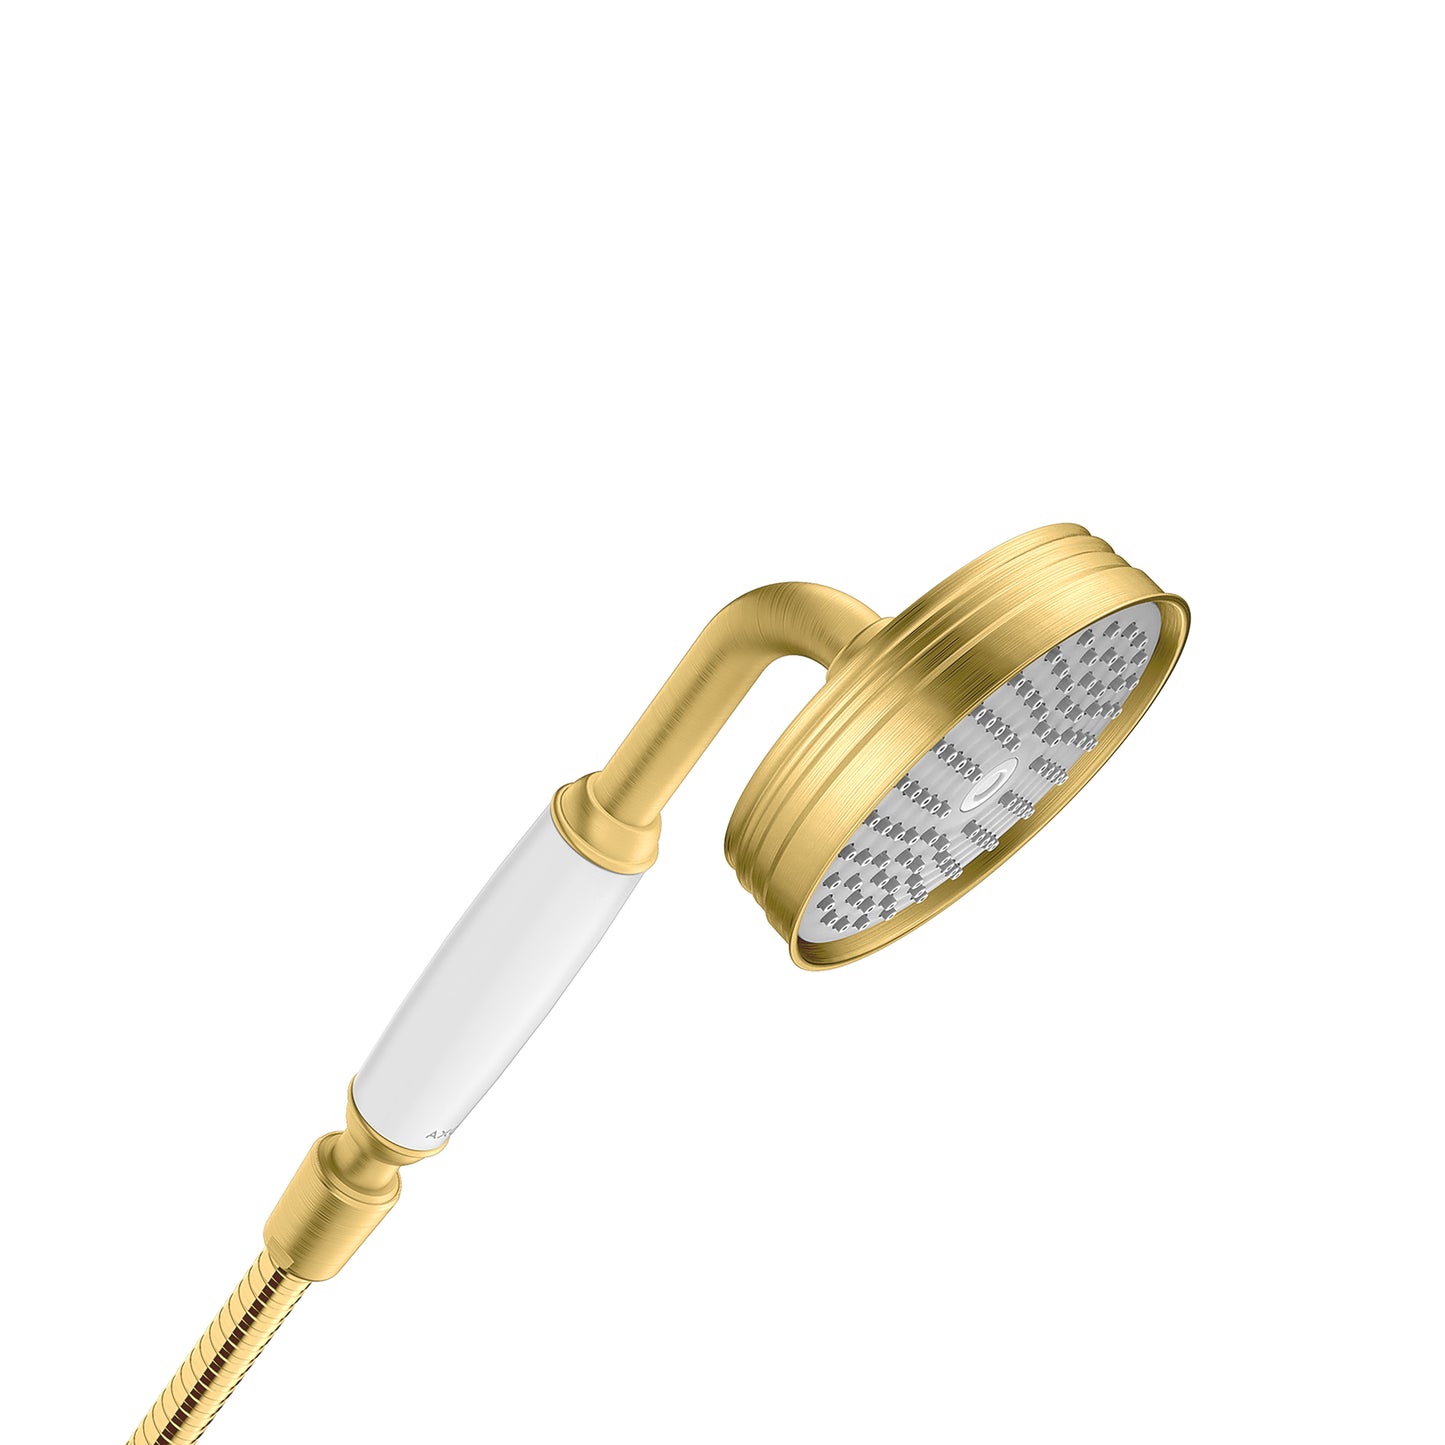 AXOR 04695250 Brushed Gold Optic Montreux Traditional Handshower 1.8 GPM